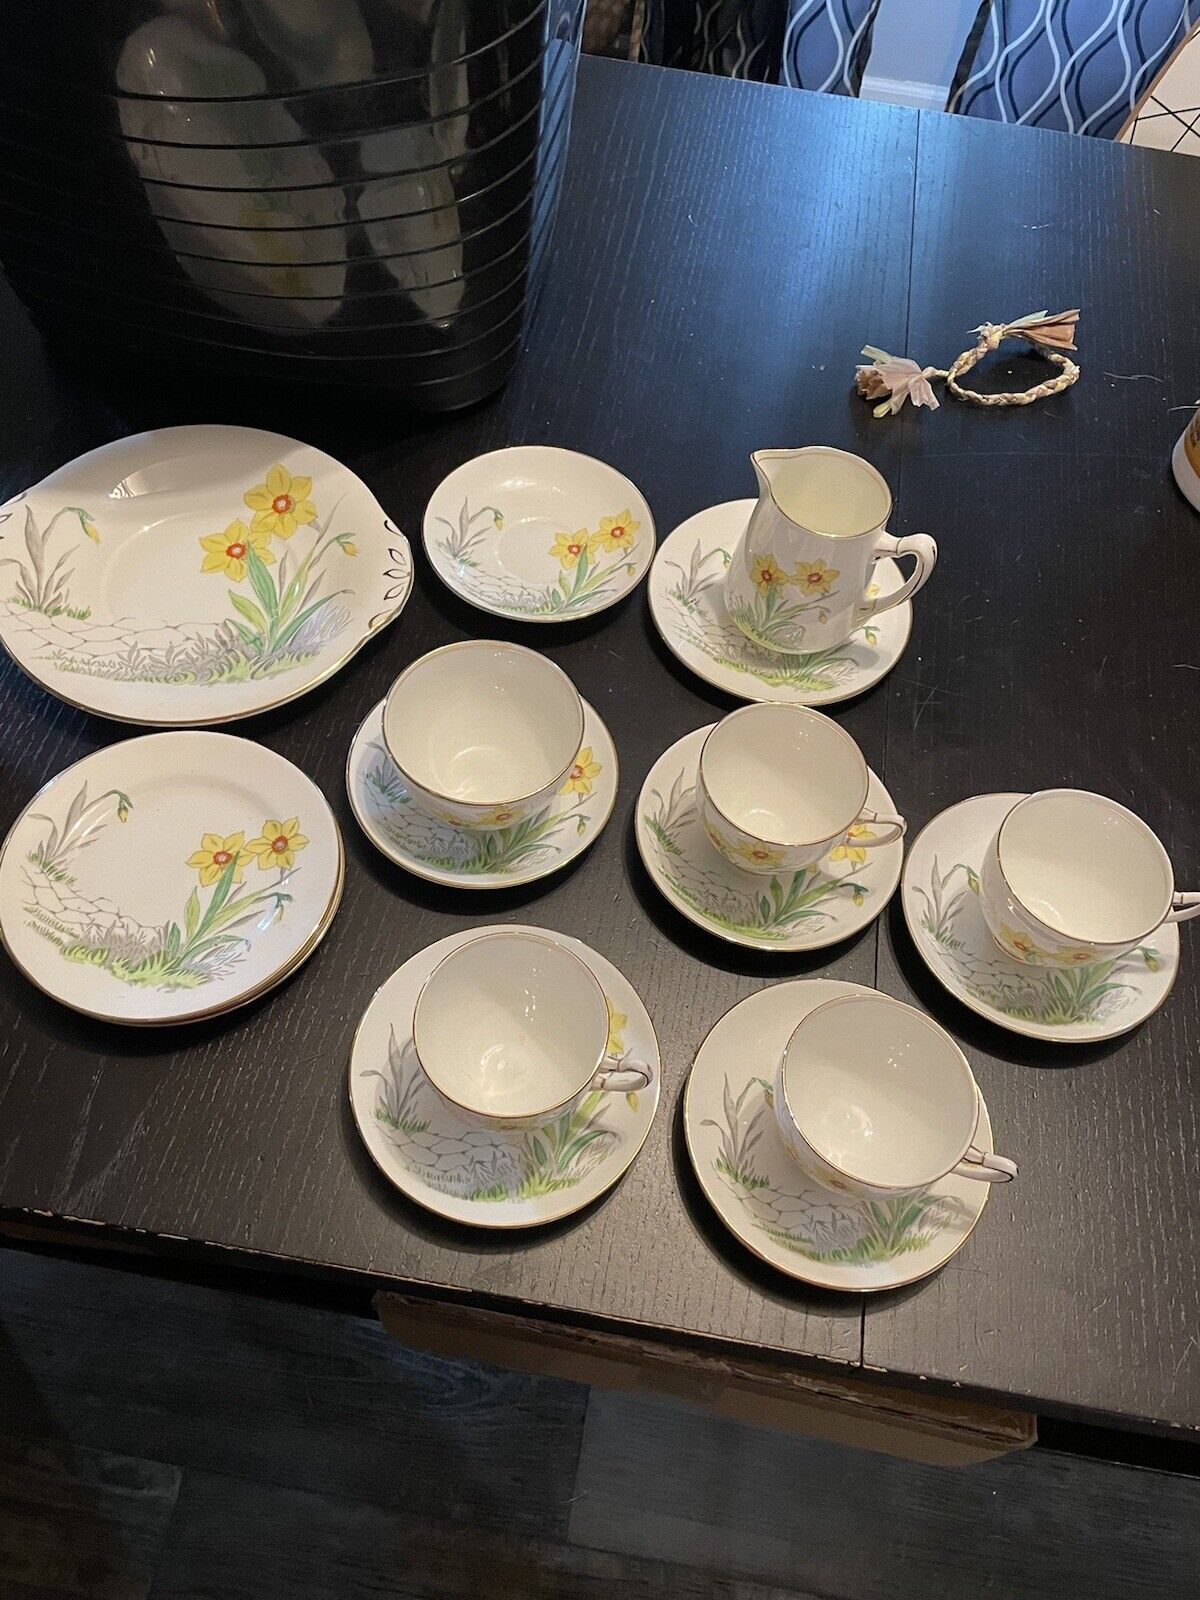 Lot of Vintage Adderley bone china, daffodil pattern, made in England 